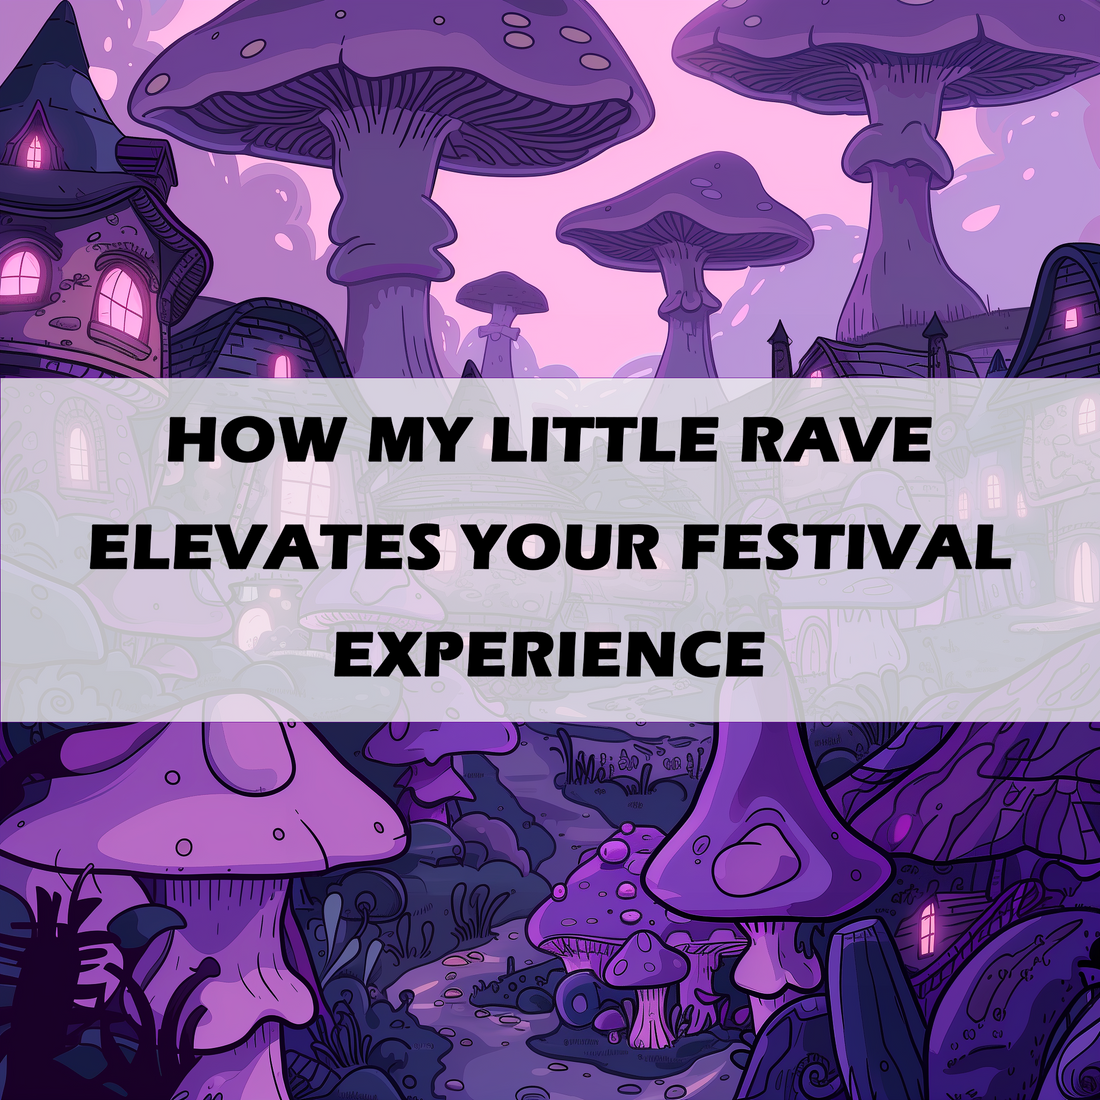 How My Little Rave Elevates Your Festival Experience